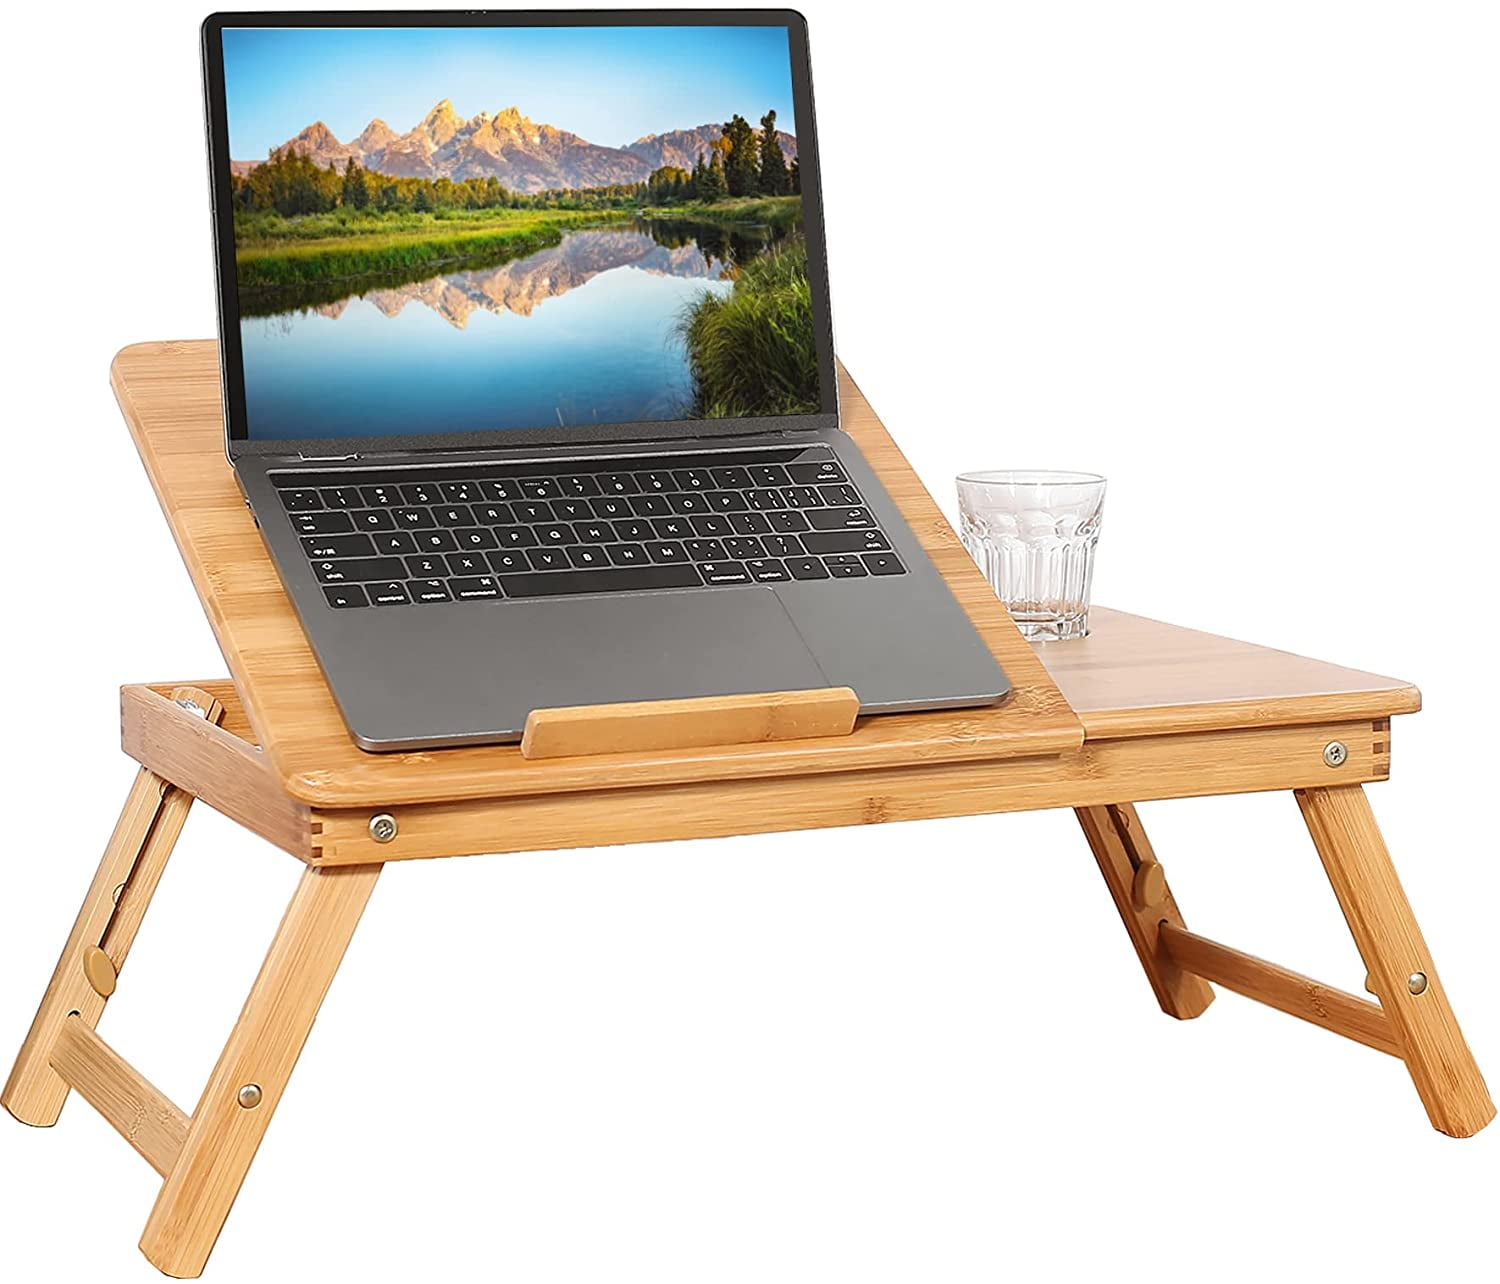 Portable Laptop Desk with Ipad Slots Folding Small Desk Dormitory TableEating Breakfast Reading Book Burlywood Working,Watching Movie on Bed/Couch/Sofa Laptop Desk Foldable Laptop Desk Bed Tray 